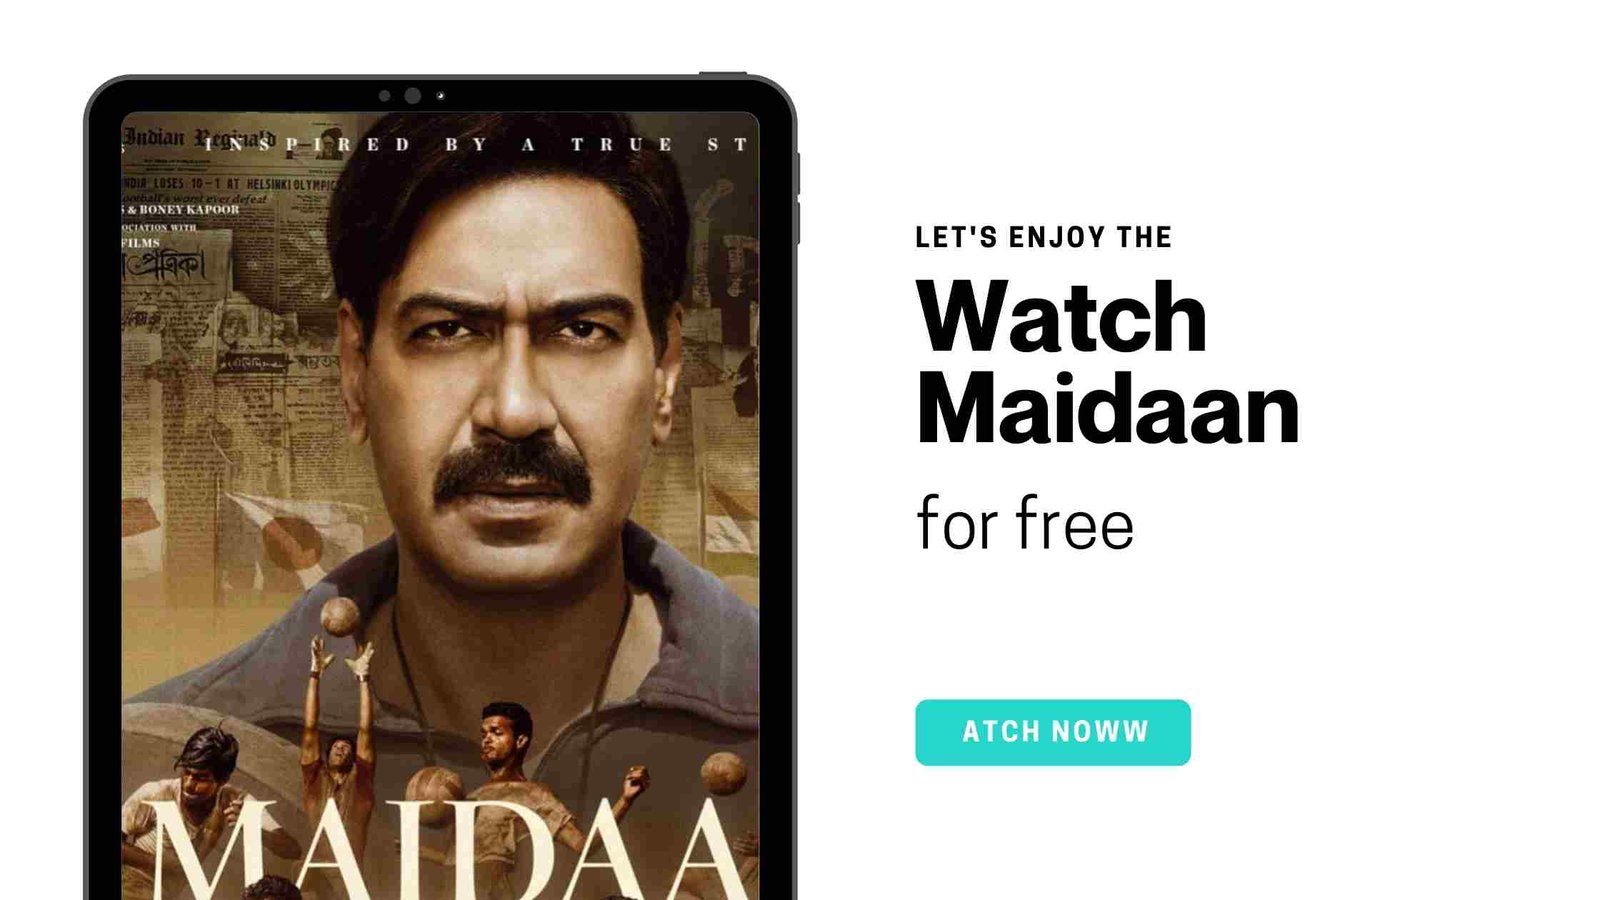 maaidan watch out now for free